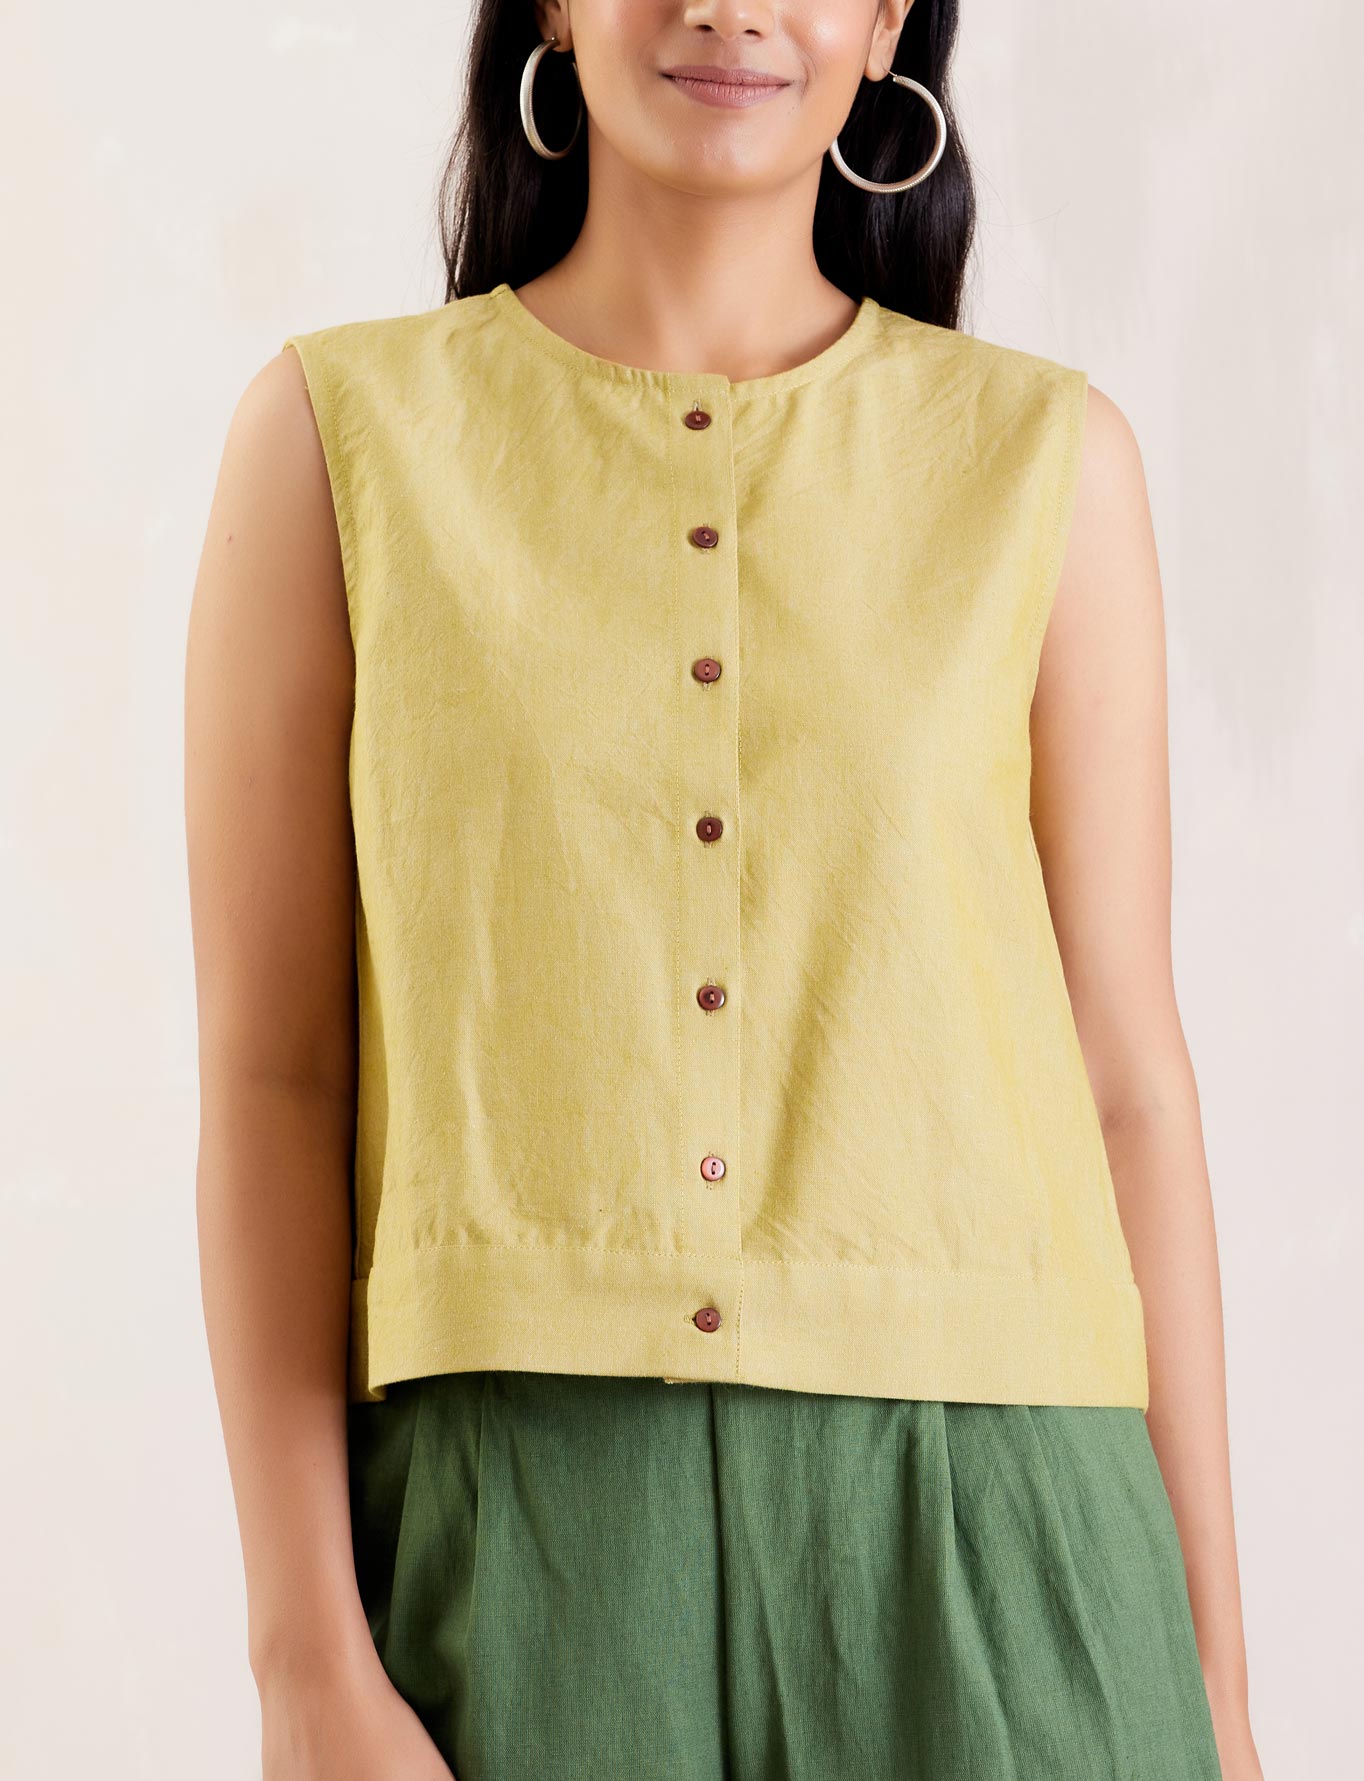 Lime Green Cotton Shirt Top - The Indian Cause